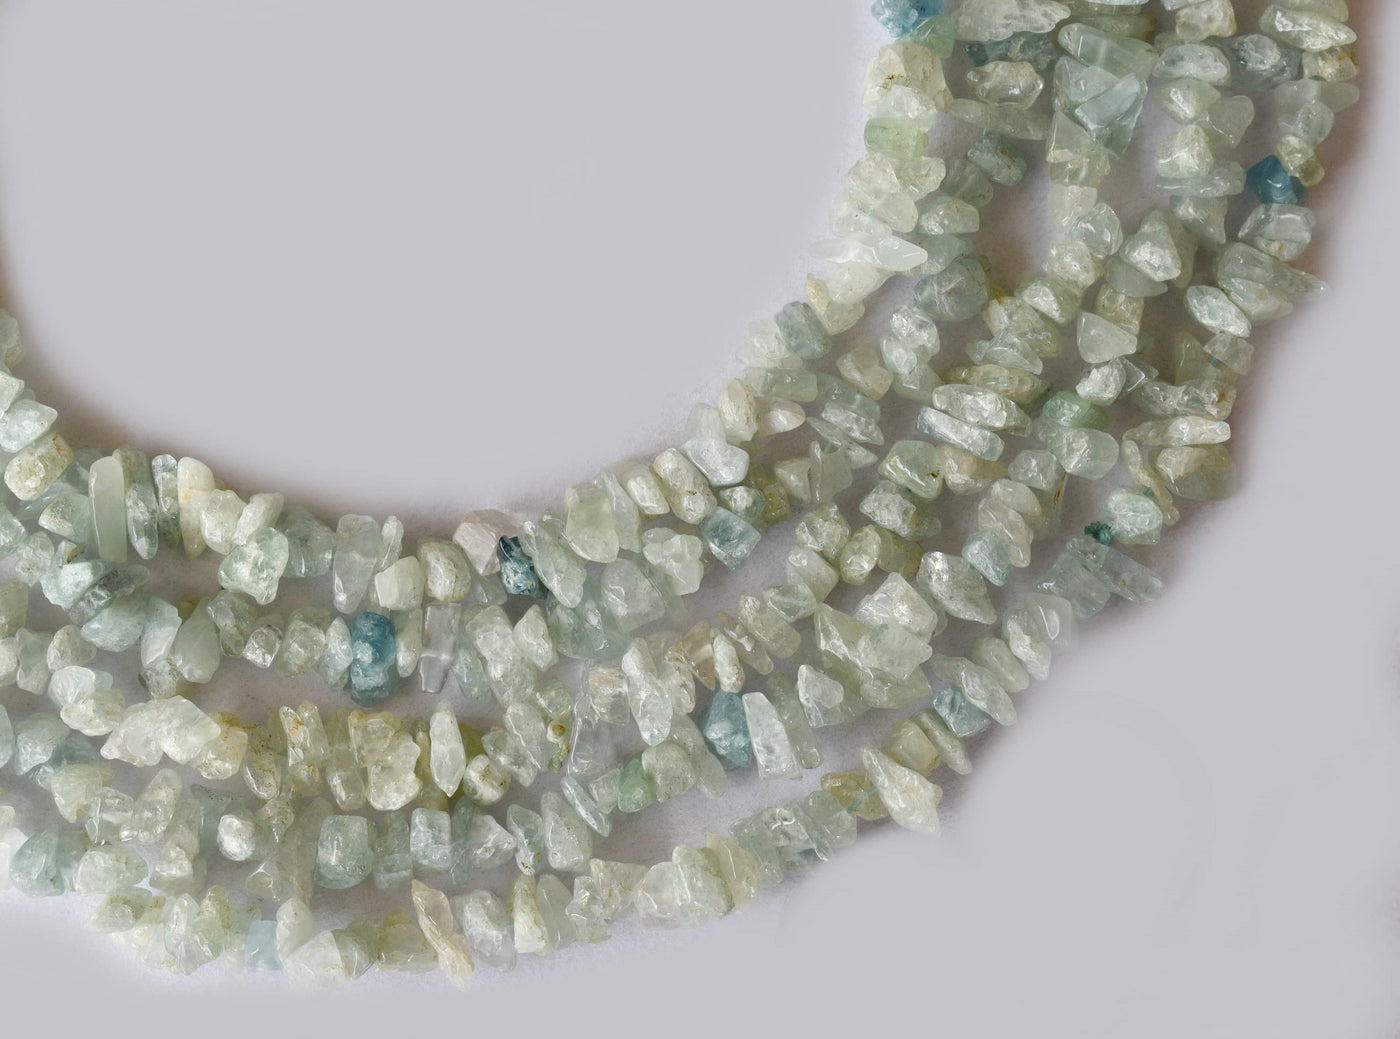 Uncut Raw Amazonite Crystal Chip Beads for Necklace (Alignment Of Chakra and Trust)